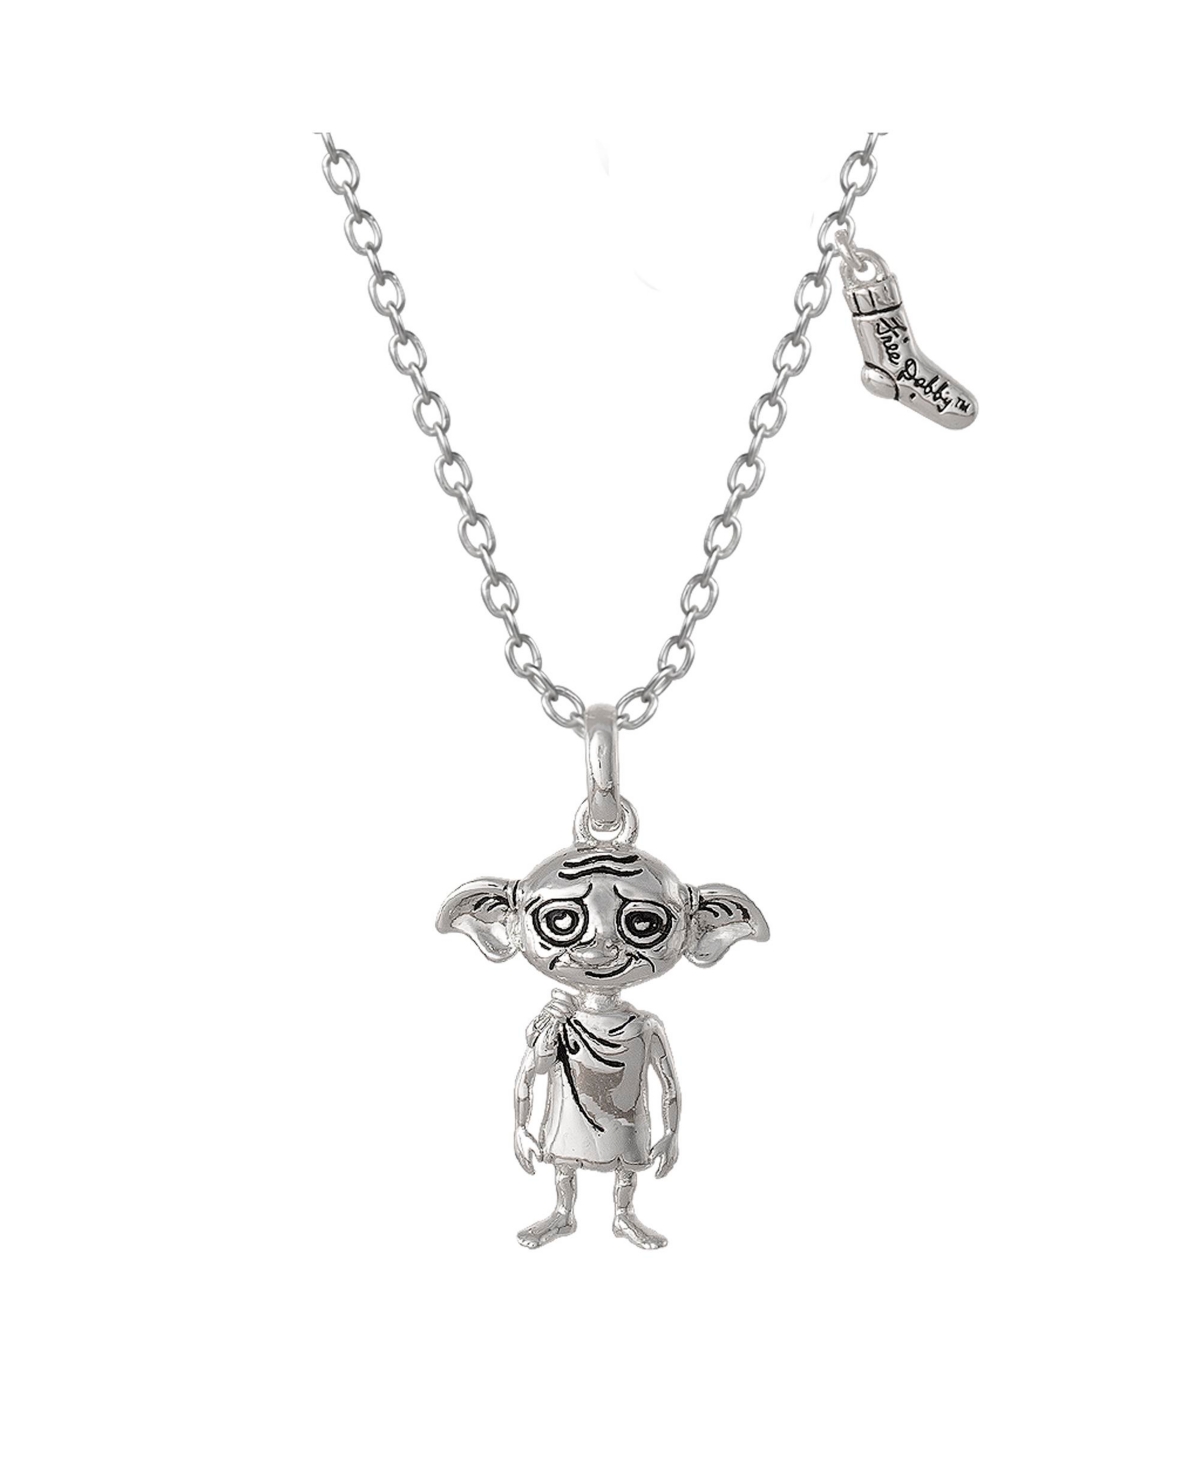 Dobby House Elf and Sock Silver Plated Necklace, 18" - Silver tone